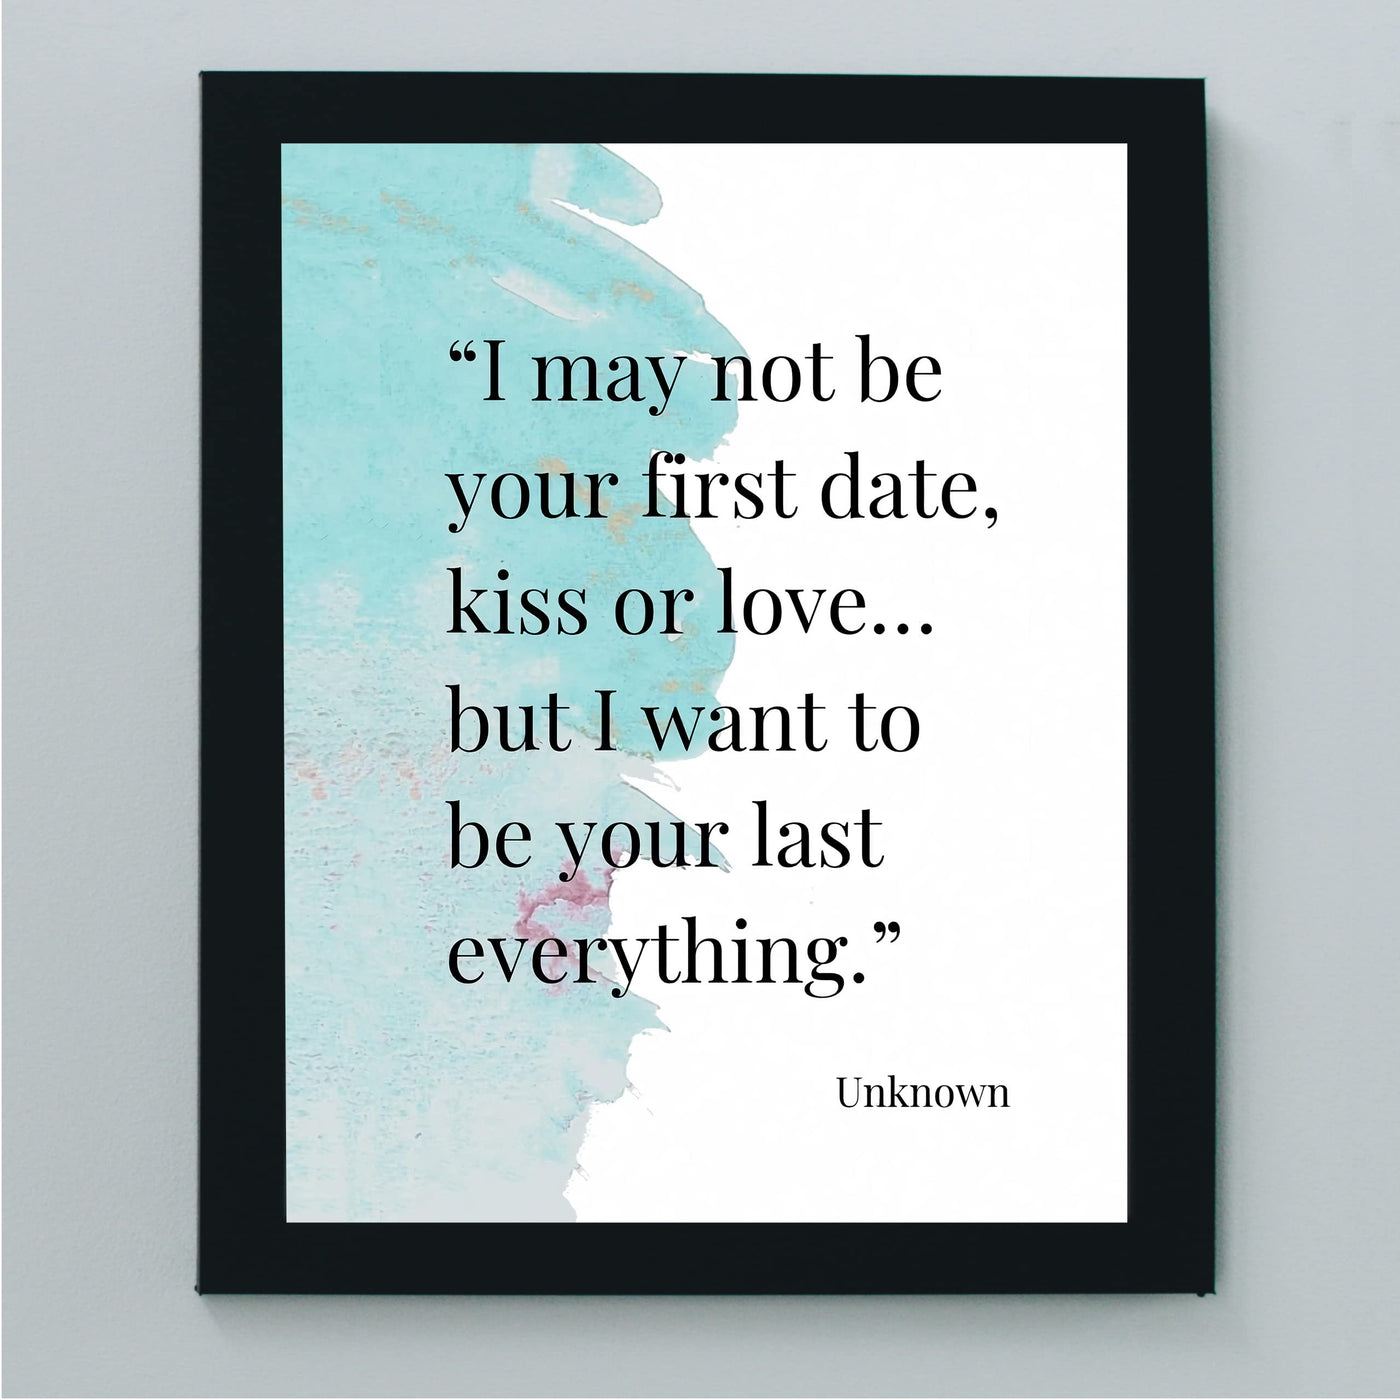 I Want To Be Your Last Everything Inspirational Love Quotes Wall Art-8x10" Rustic Watercolor Design Print-Ready to Frame. Romantic Decor for Home-Bedroom-Wedding-Engagement. Great Gift for Couples!